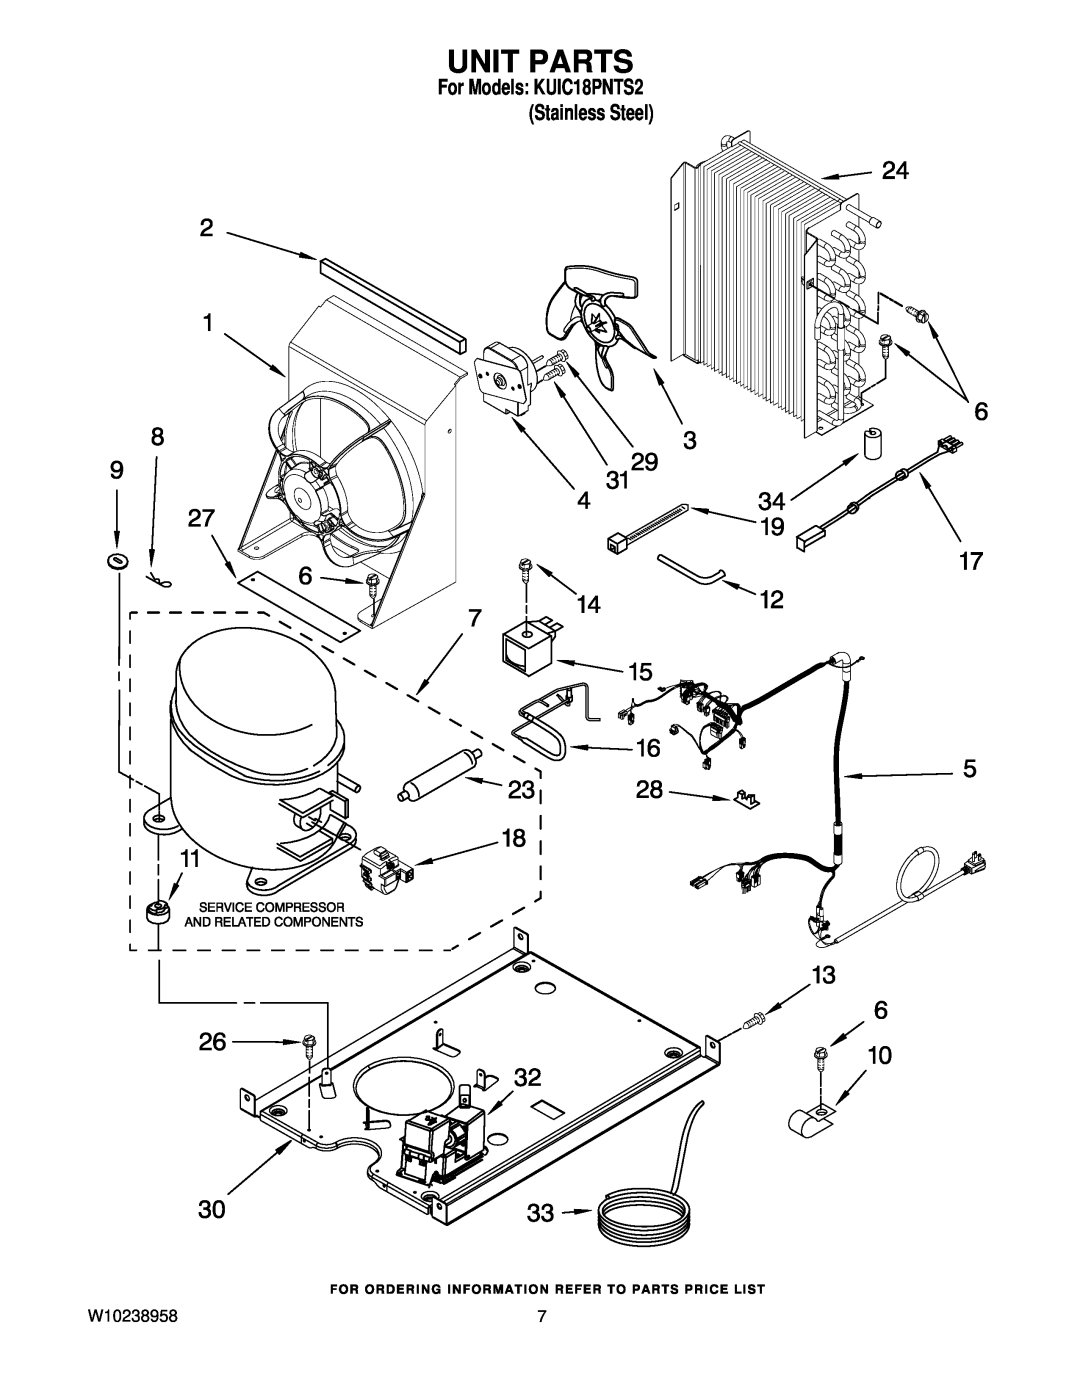 KitchenAid manual Unit Parts, W10238958, For Models KUIC18PNTS2 Stainless Steel 